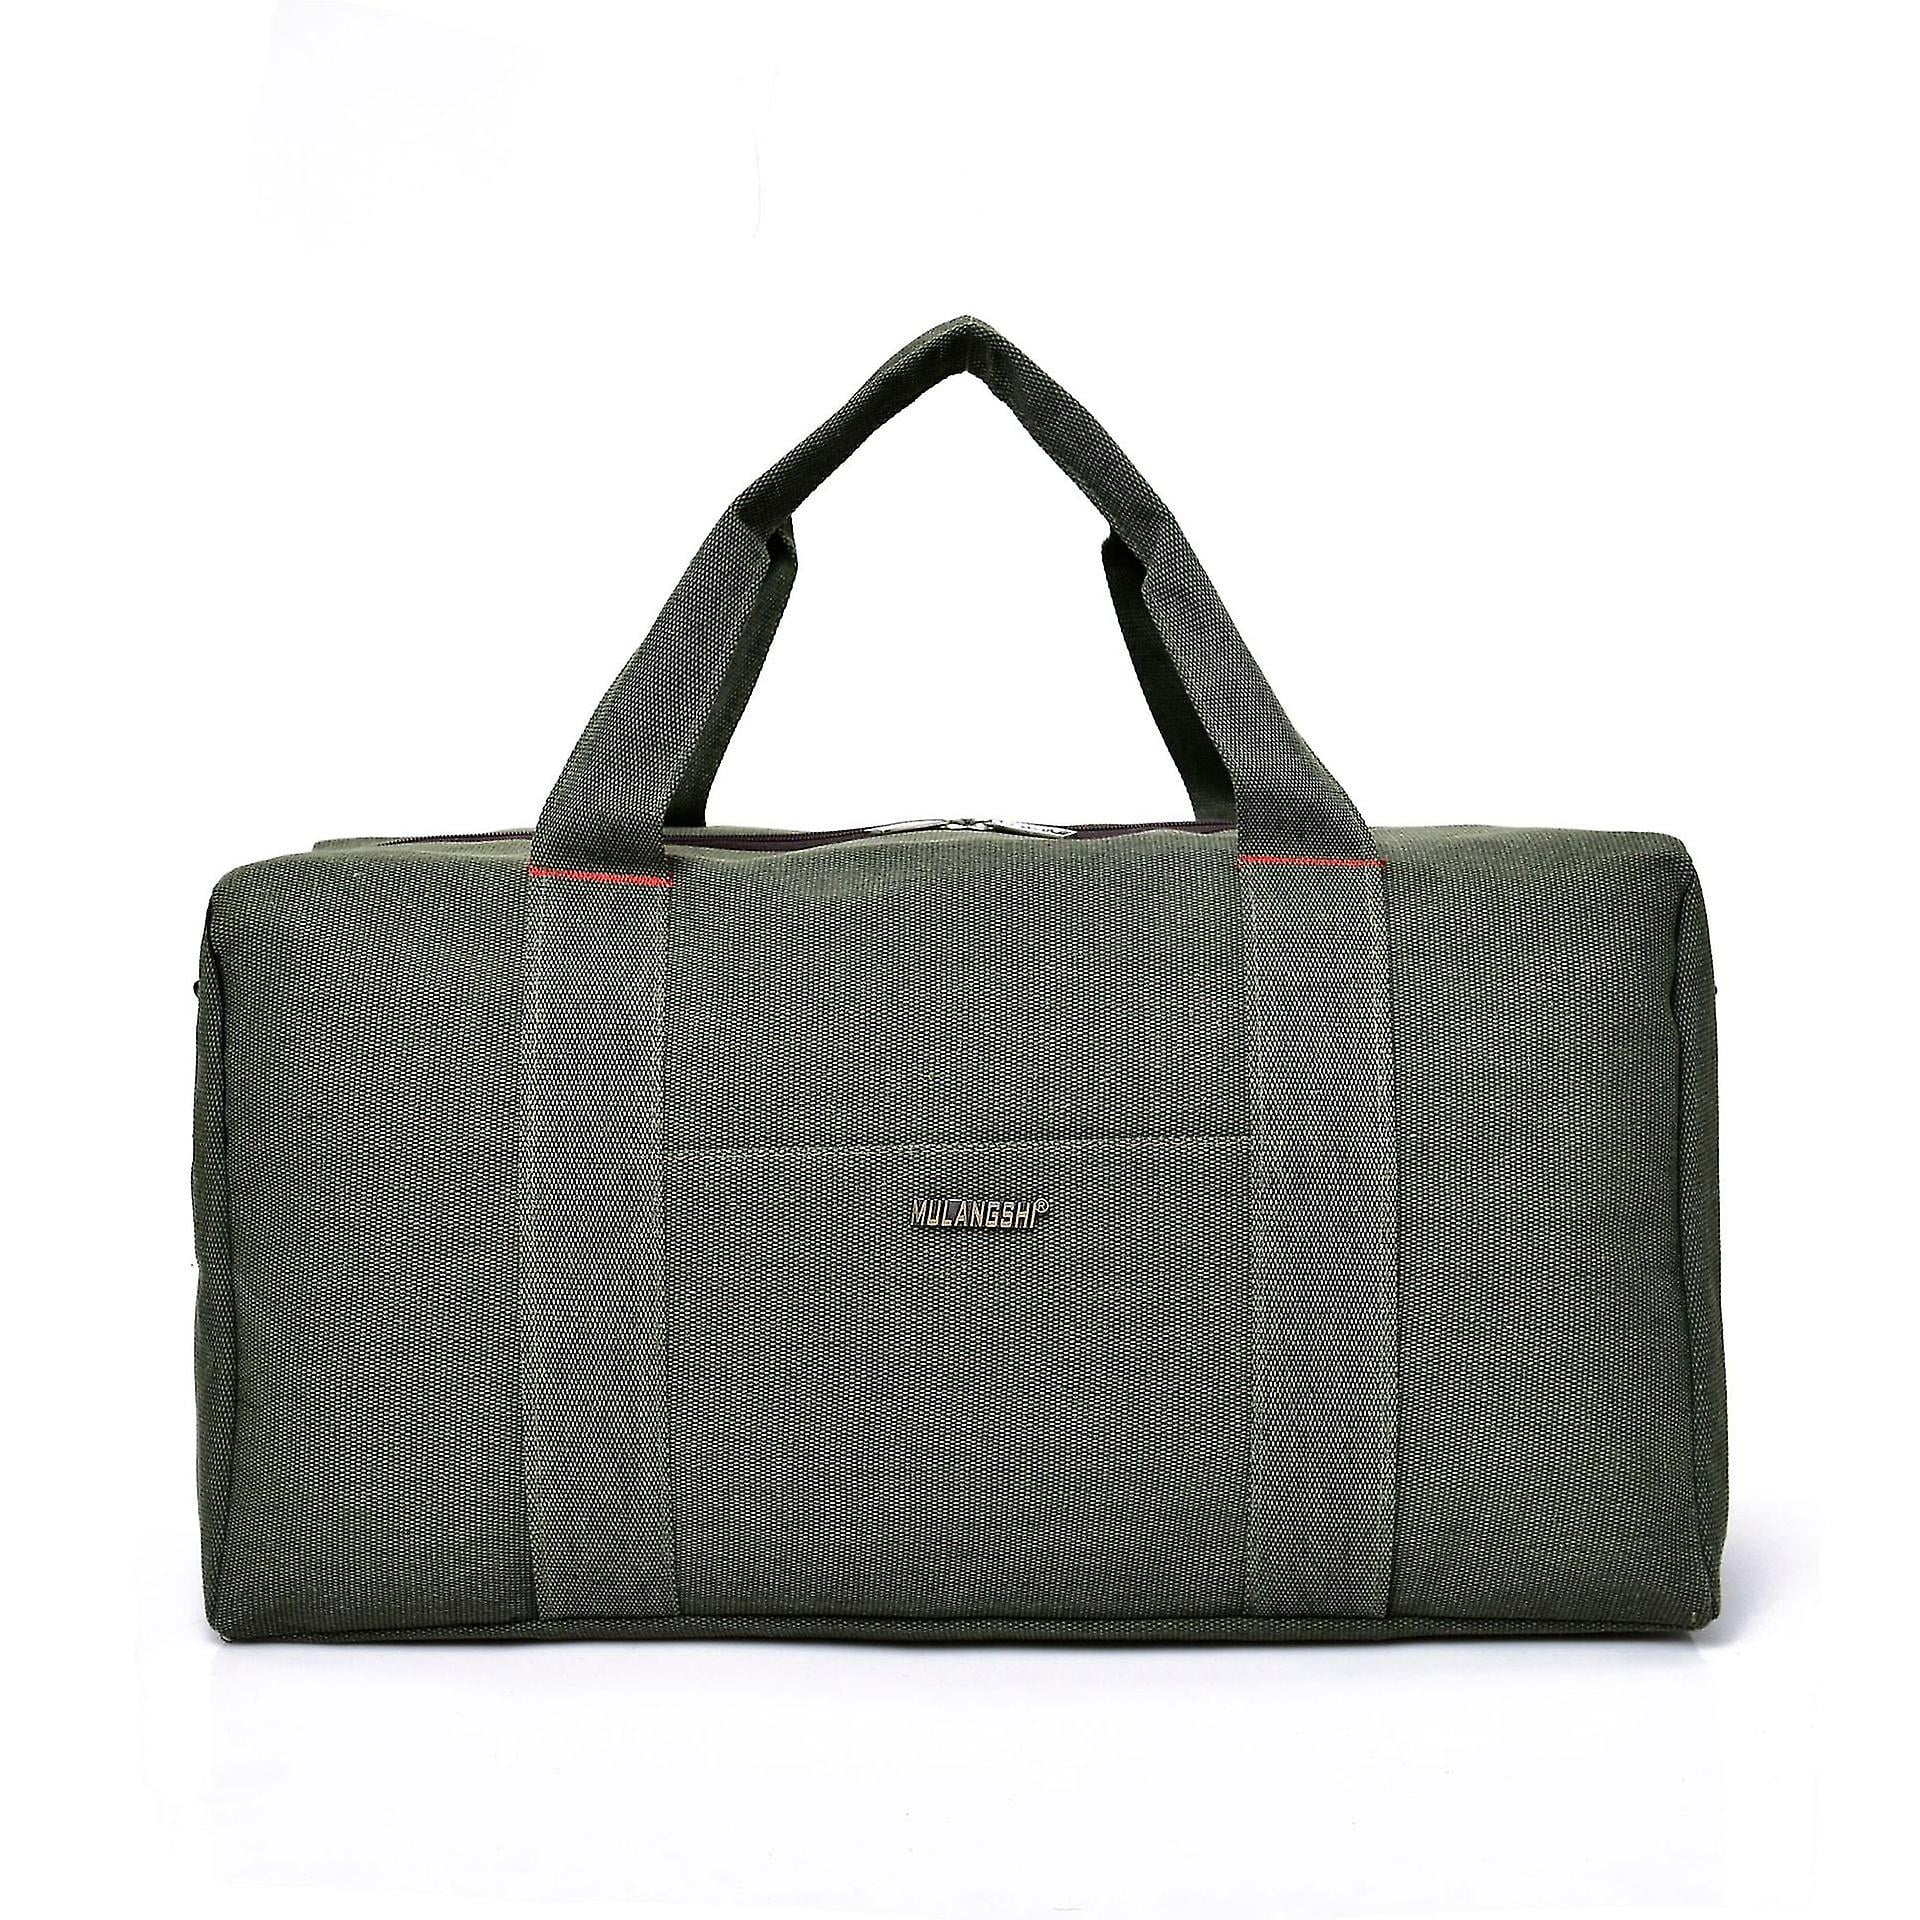 Canvas Traveling Bag Thickened And Large-capacity Luggage Bag